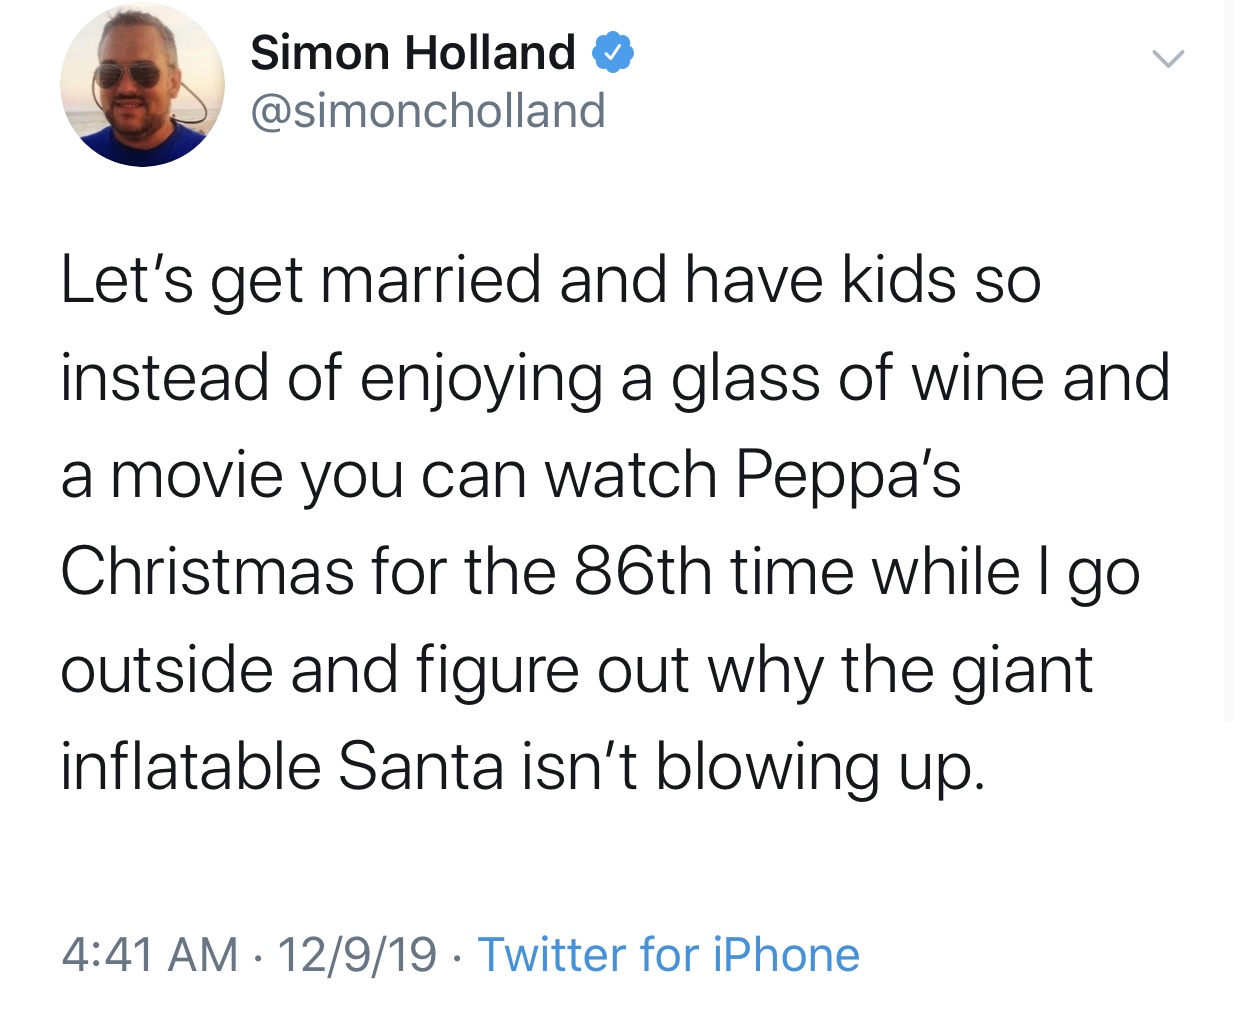 lin manuel miranda twitter - Simon Holland Let's get married and have kids so instead of enjoying a glass of wine and a movie you can watch Peppa's Christmas for the 86th time while I go outside and figure out why the giant inflatable Santa isn't blowing 